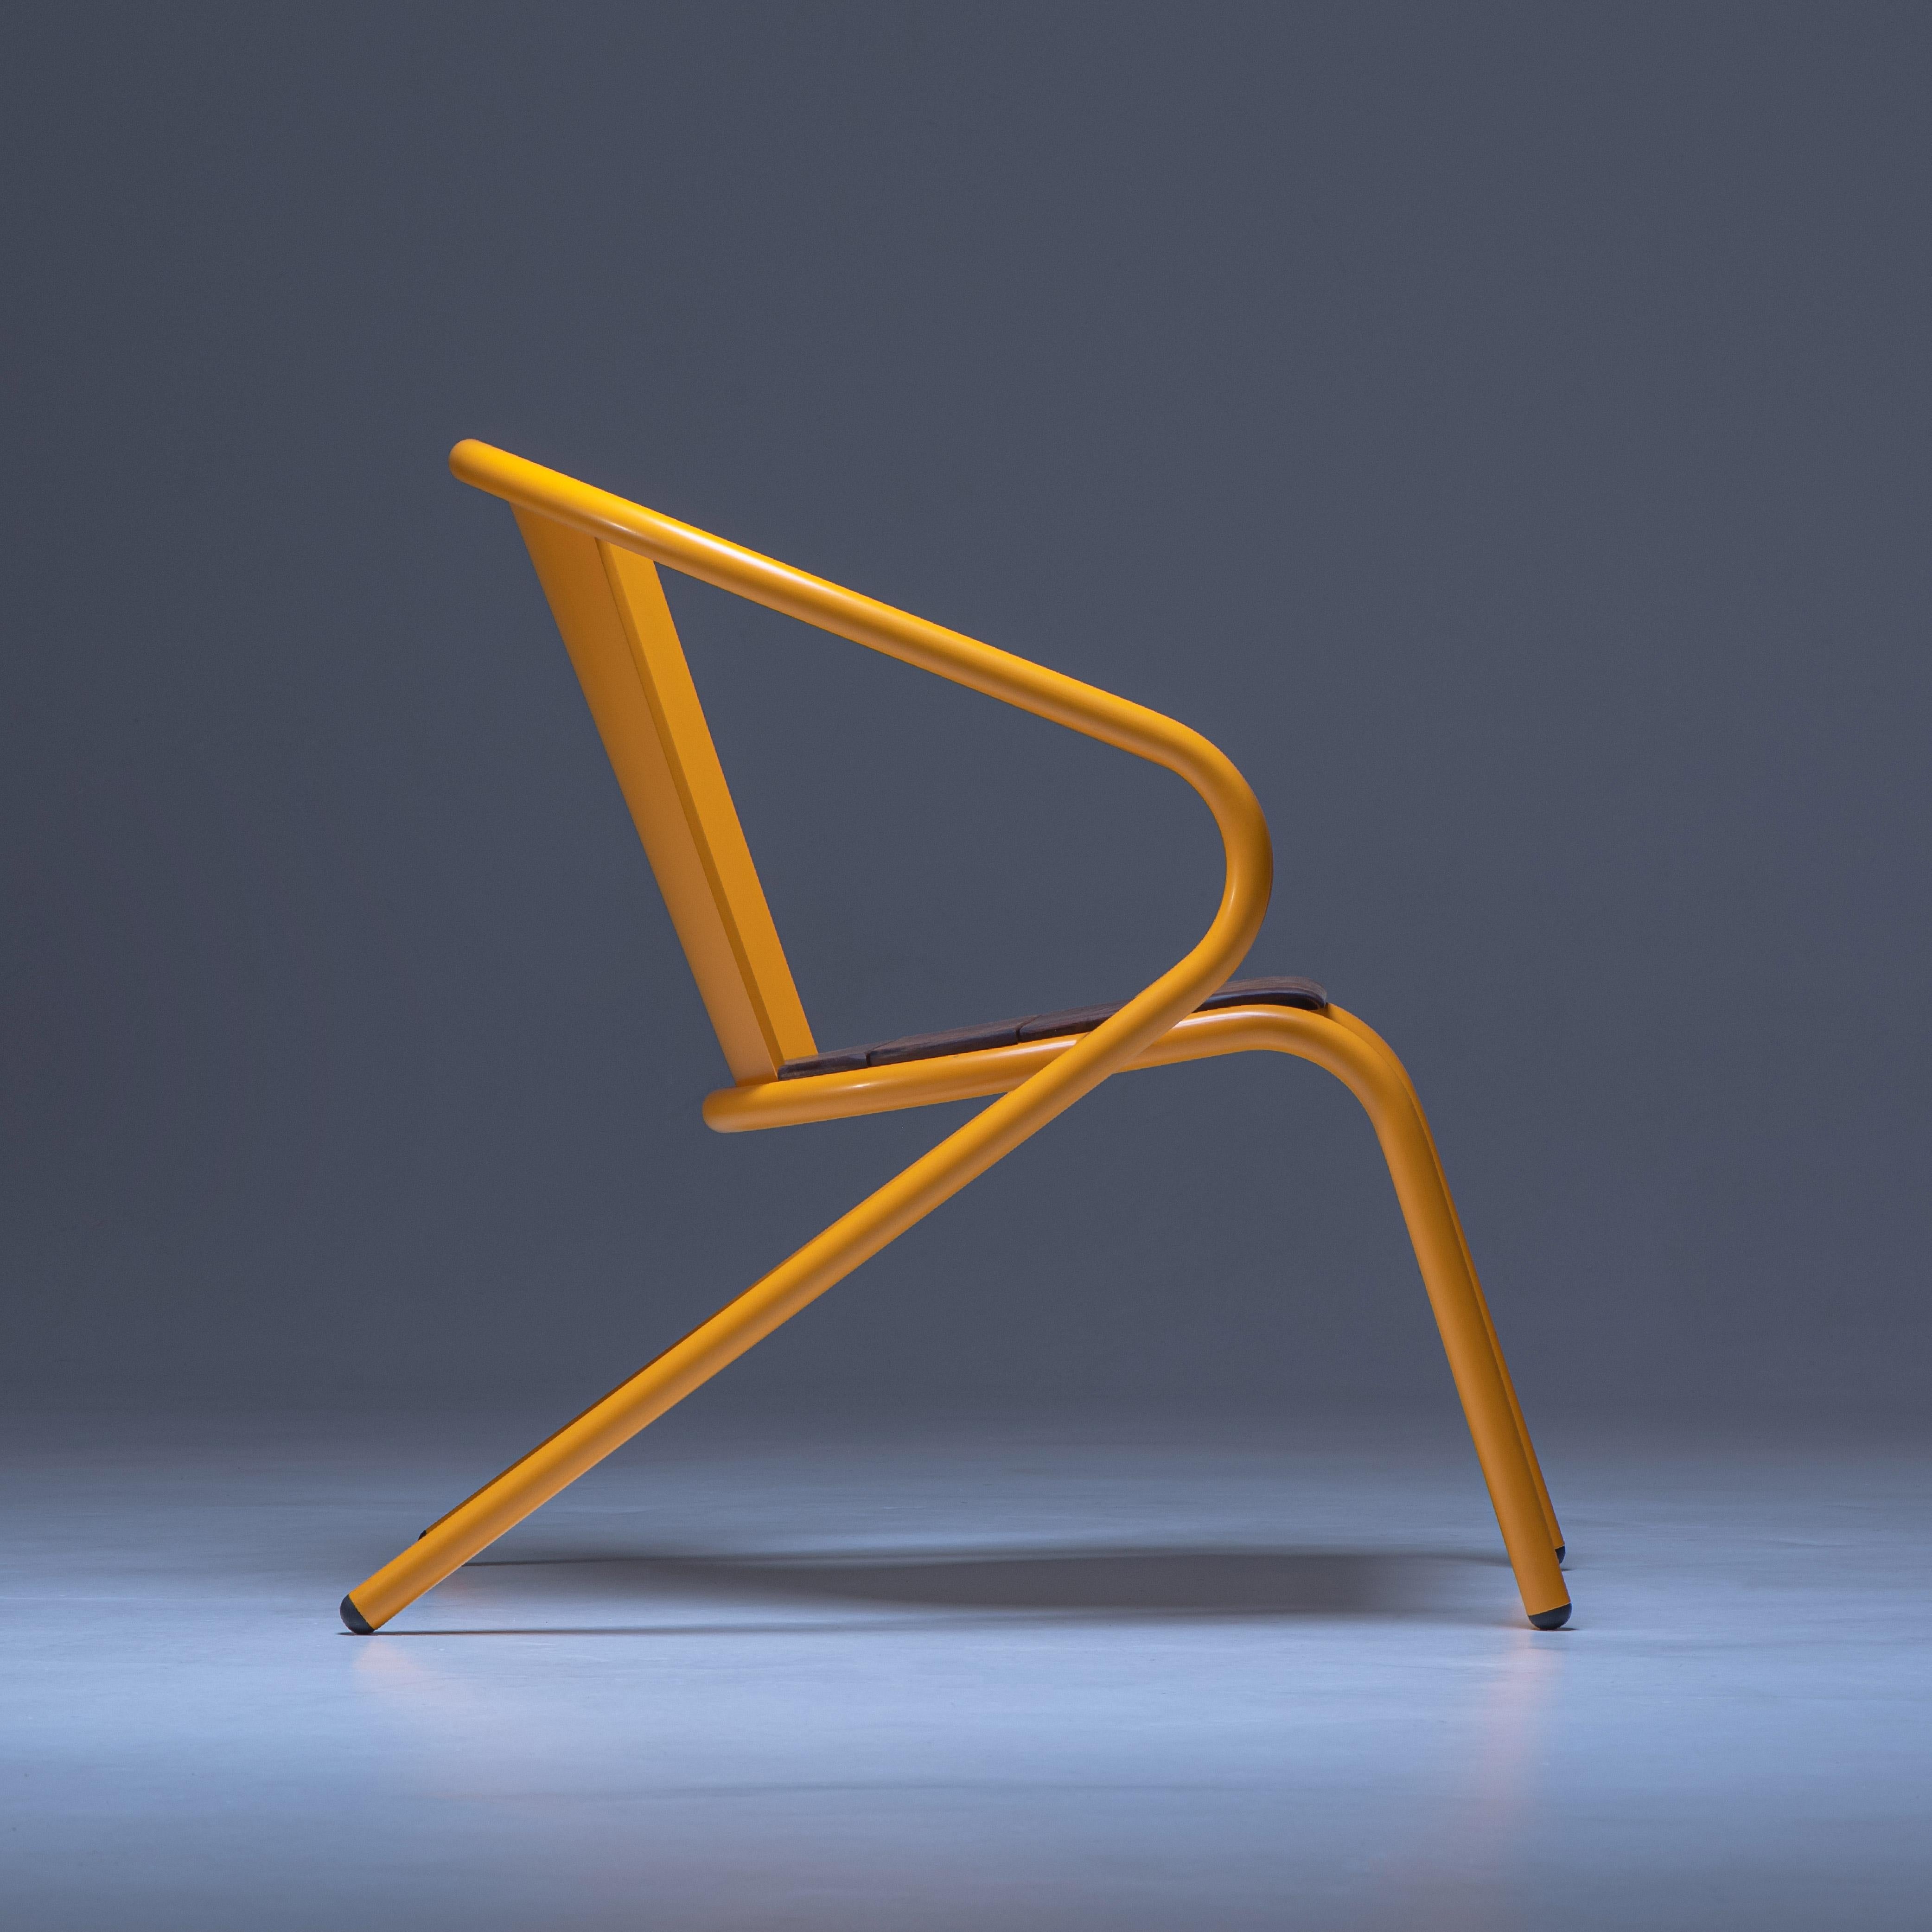 BICAlounge is a sustainable stackable steel lounge chair made for the outdoors from recycled and recyclable steel and finished with our premium selection of powder-coating colors, in this case in a bright yellow color, that transforms a Classic into